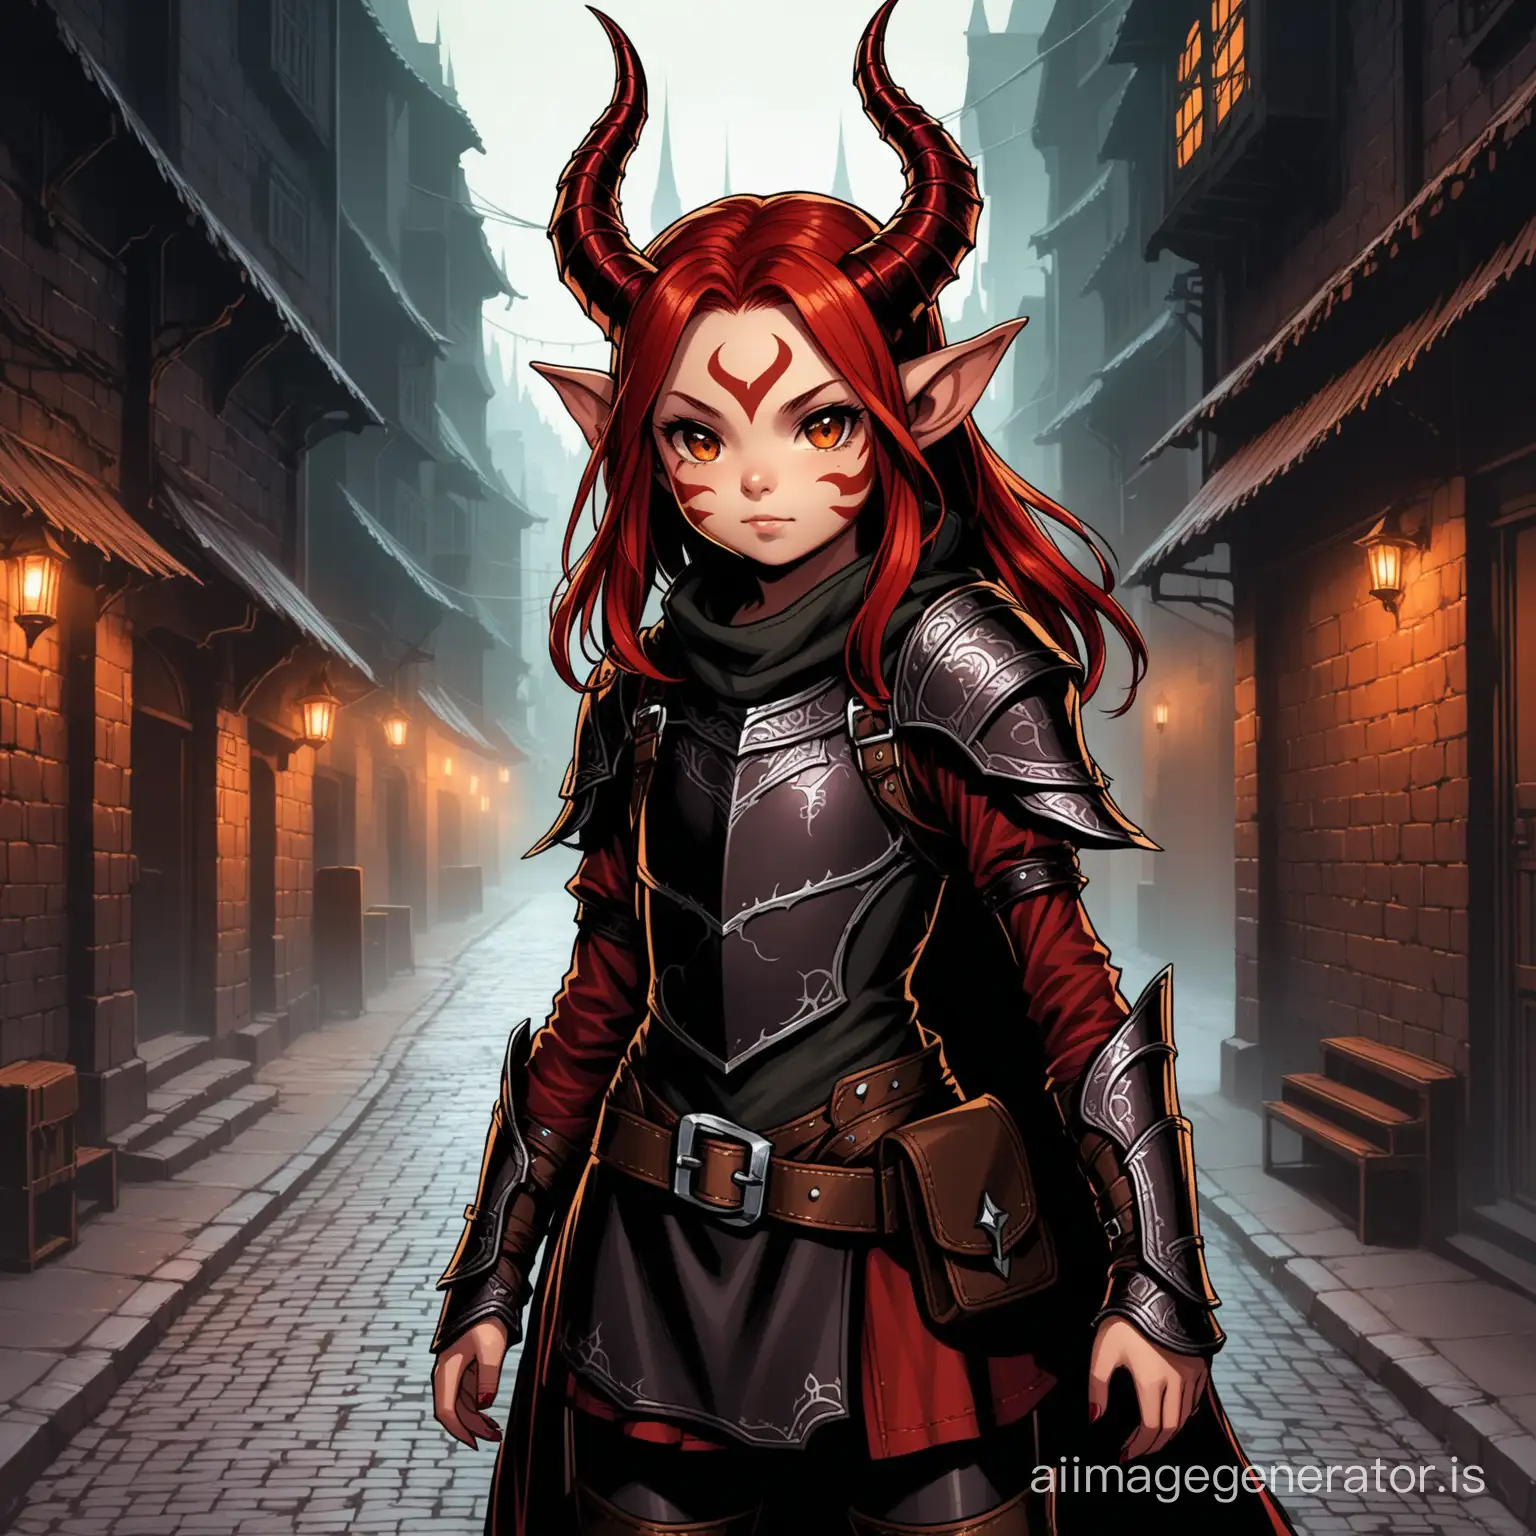 9-year-old tiefling rogue girl with red horns and red hair in a dark city, with markings on her face, wearing dark leather armor.